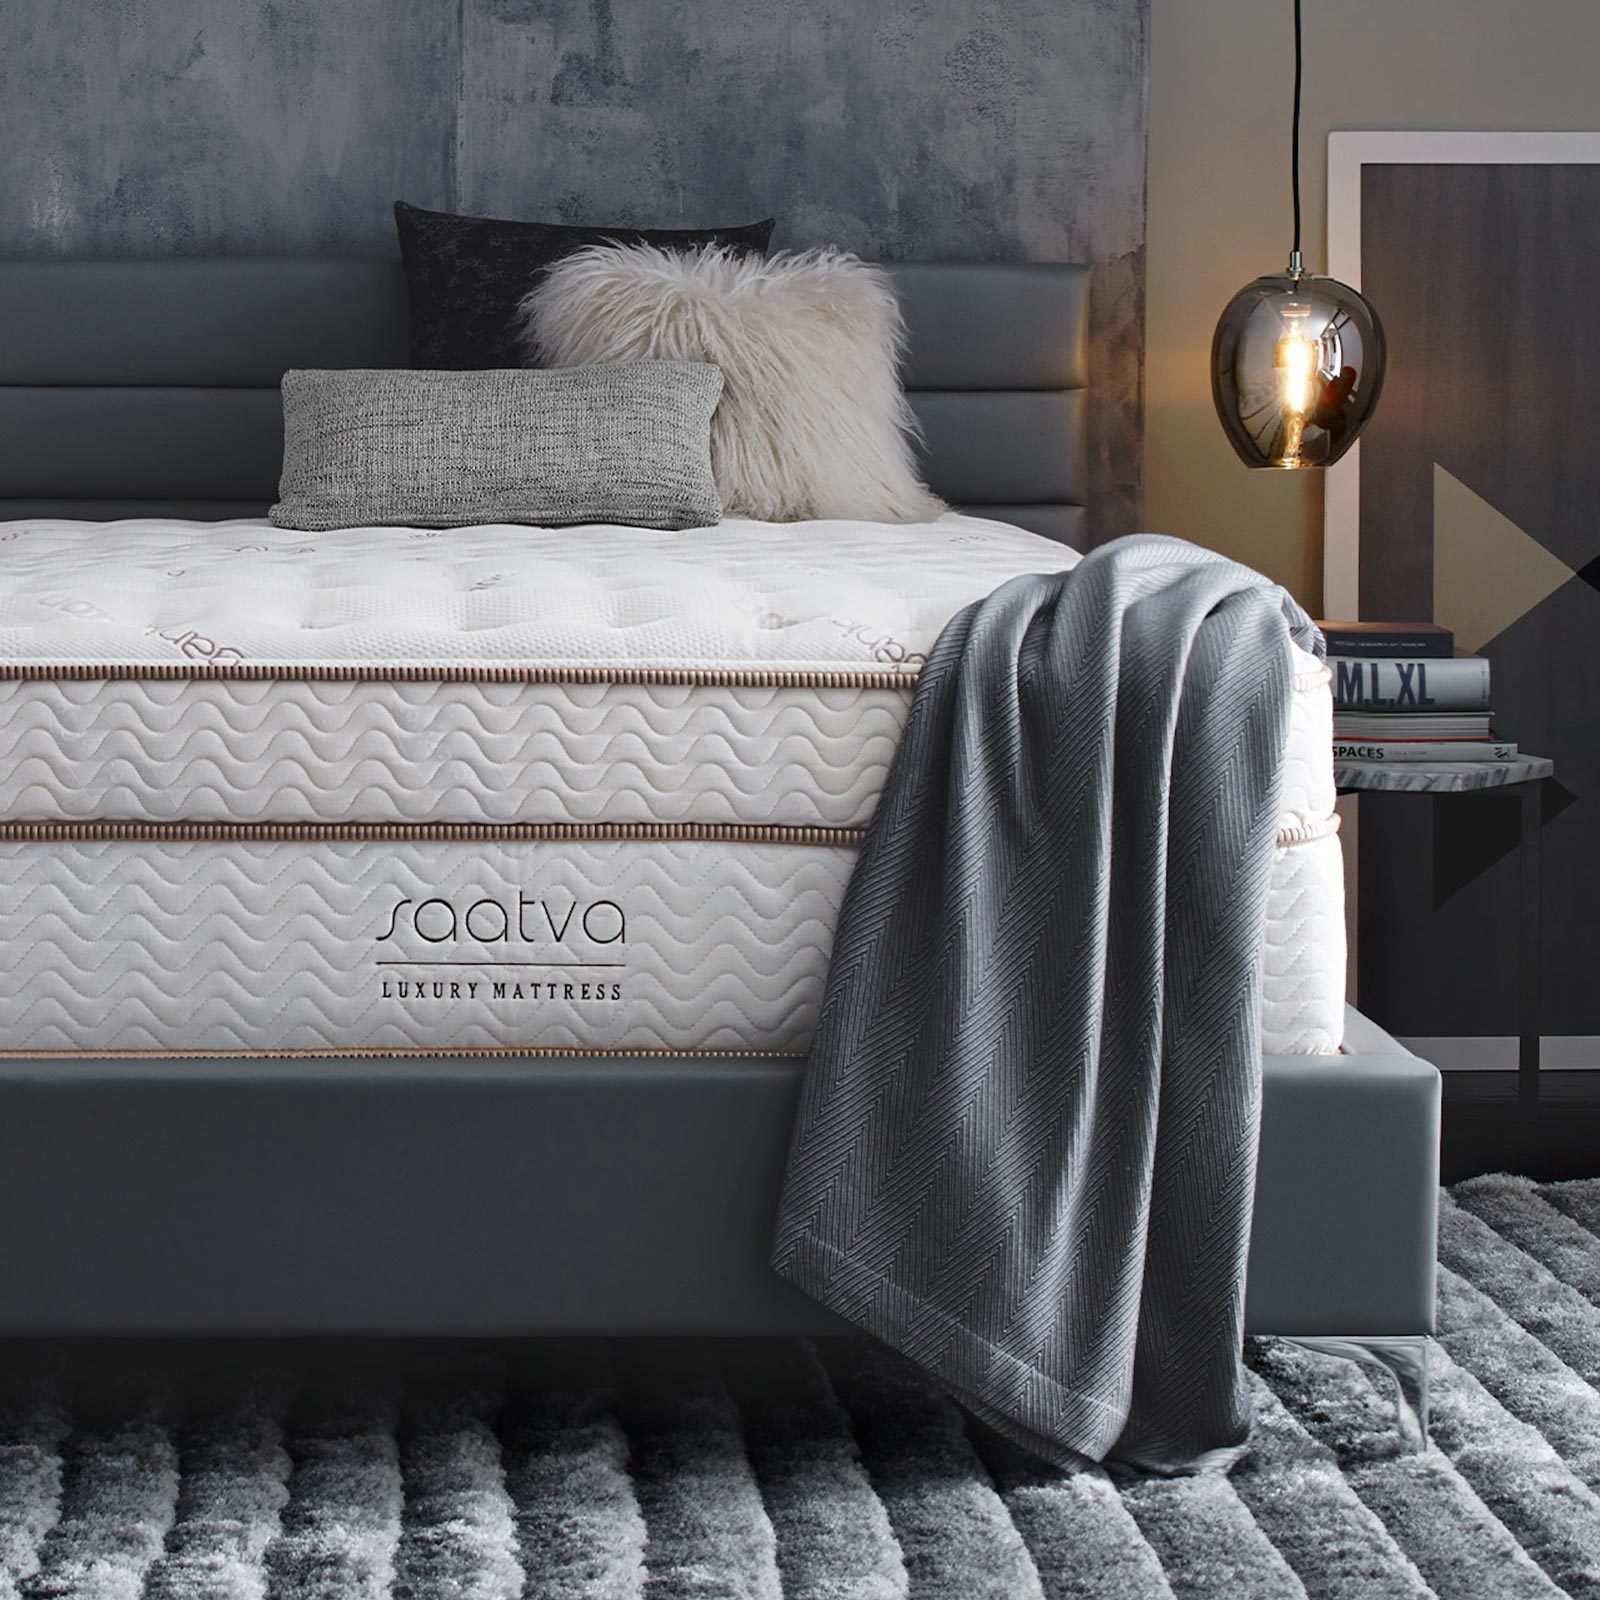 The 8 Best Mattresses of 2023 Foam, Innerspring and Hybrid Options